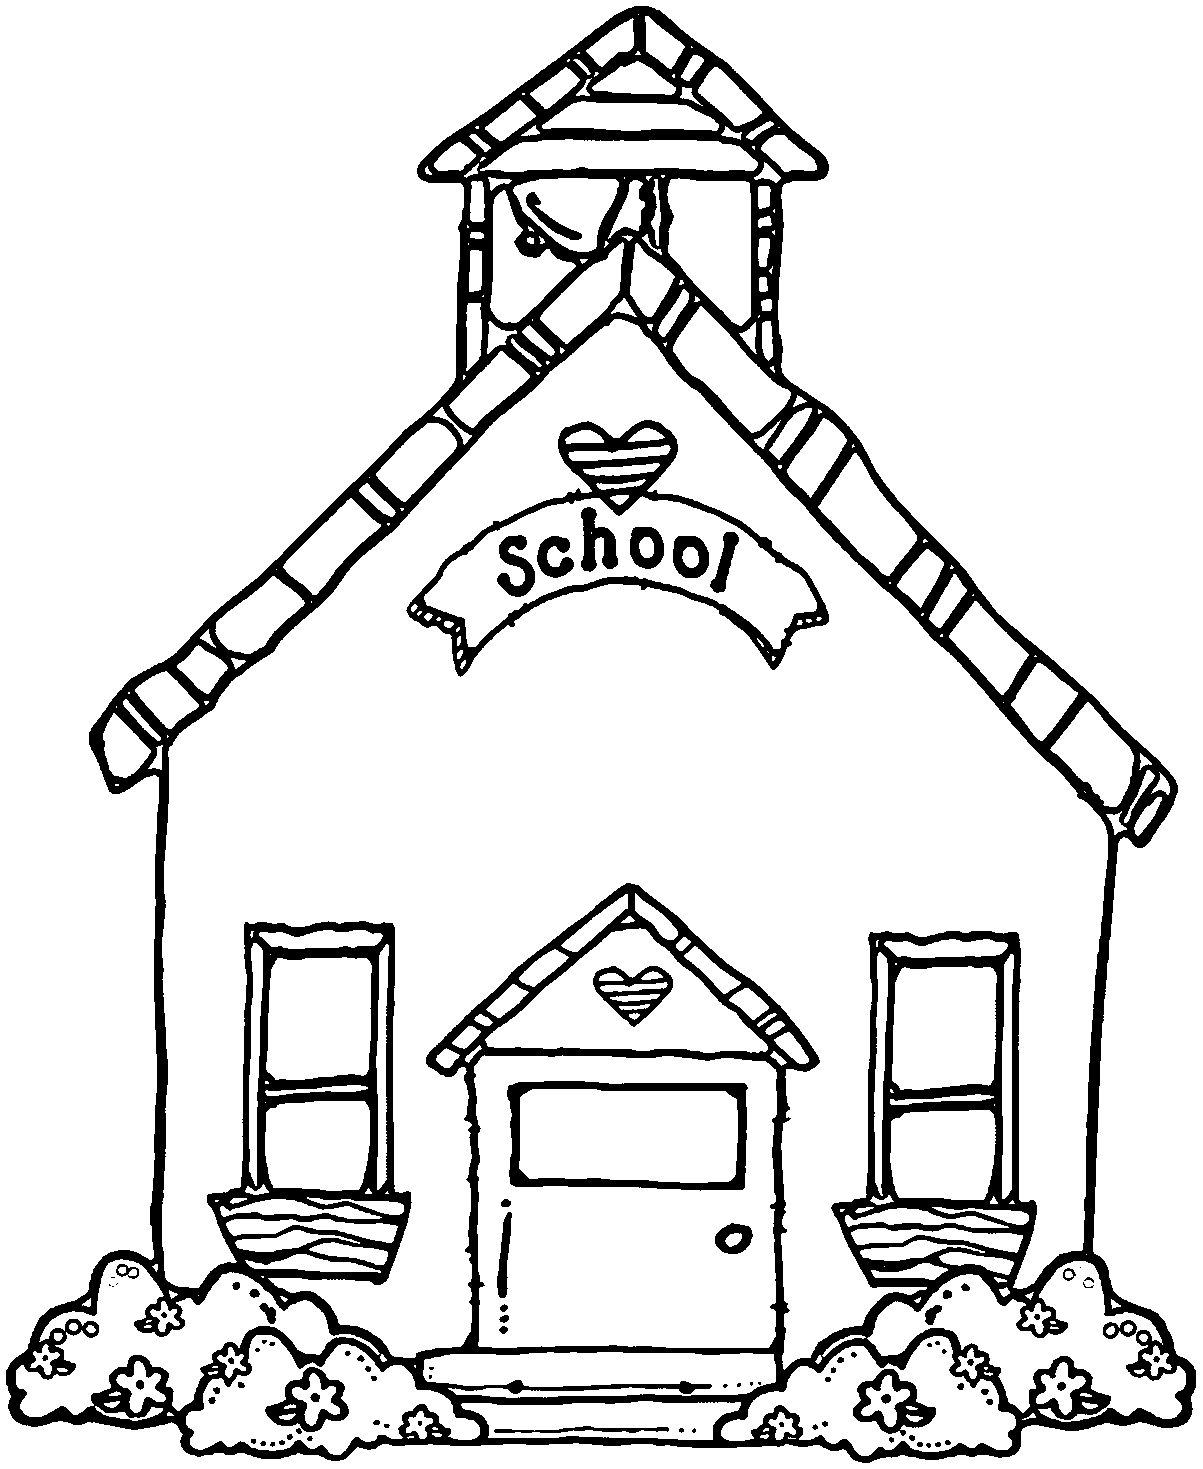 free clipart images school house - photo #29